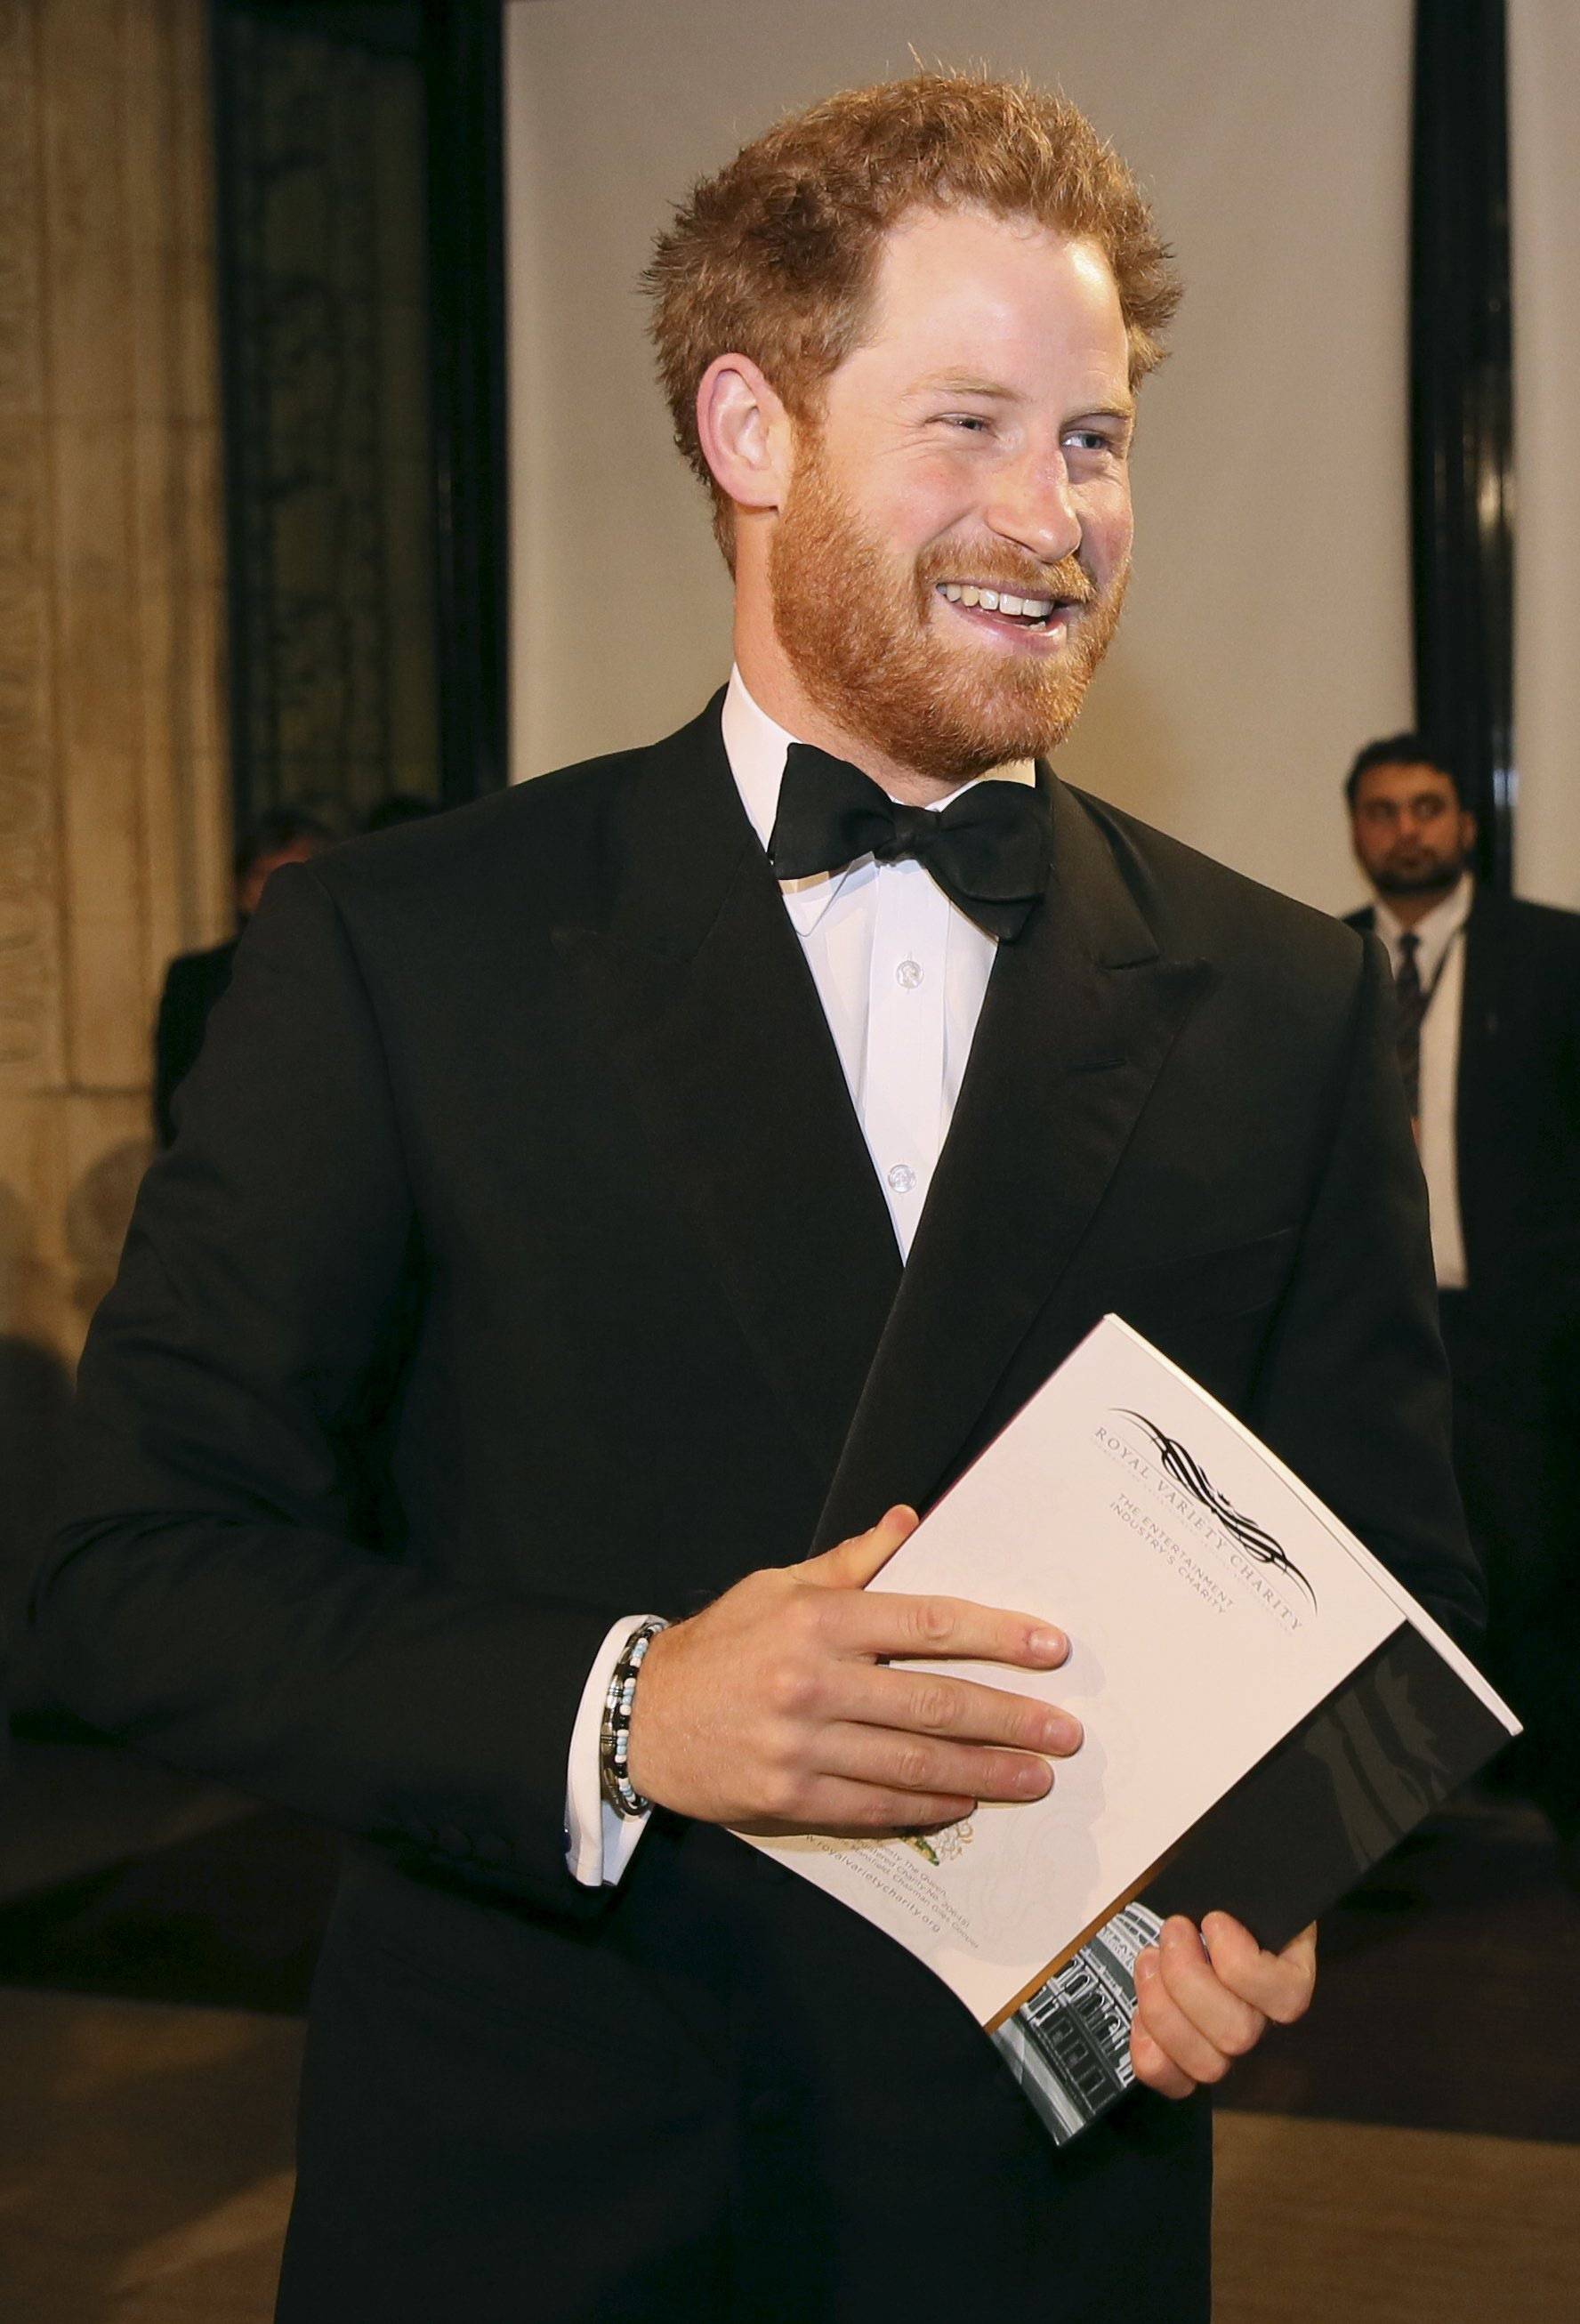 Britain's Prince Harry arrives at the Royal Variety Performance at the Albert Hall in London